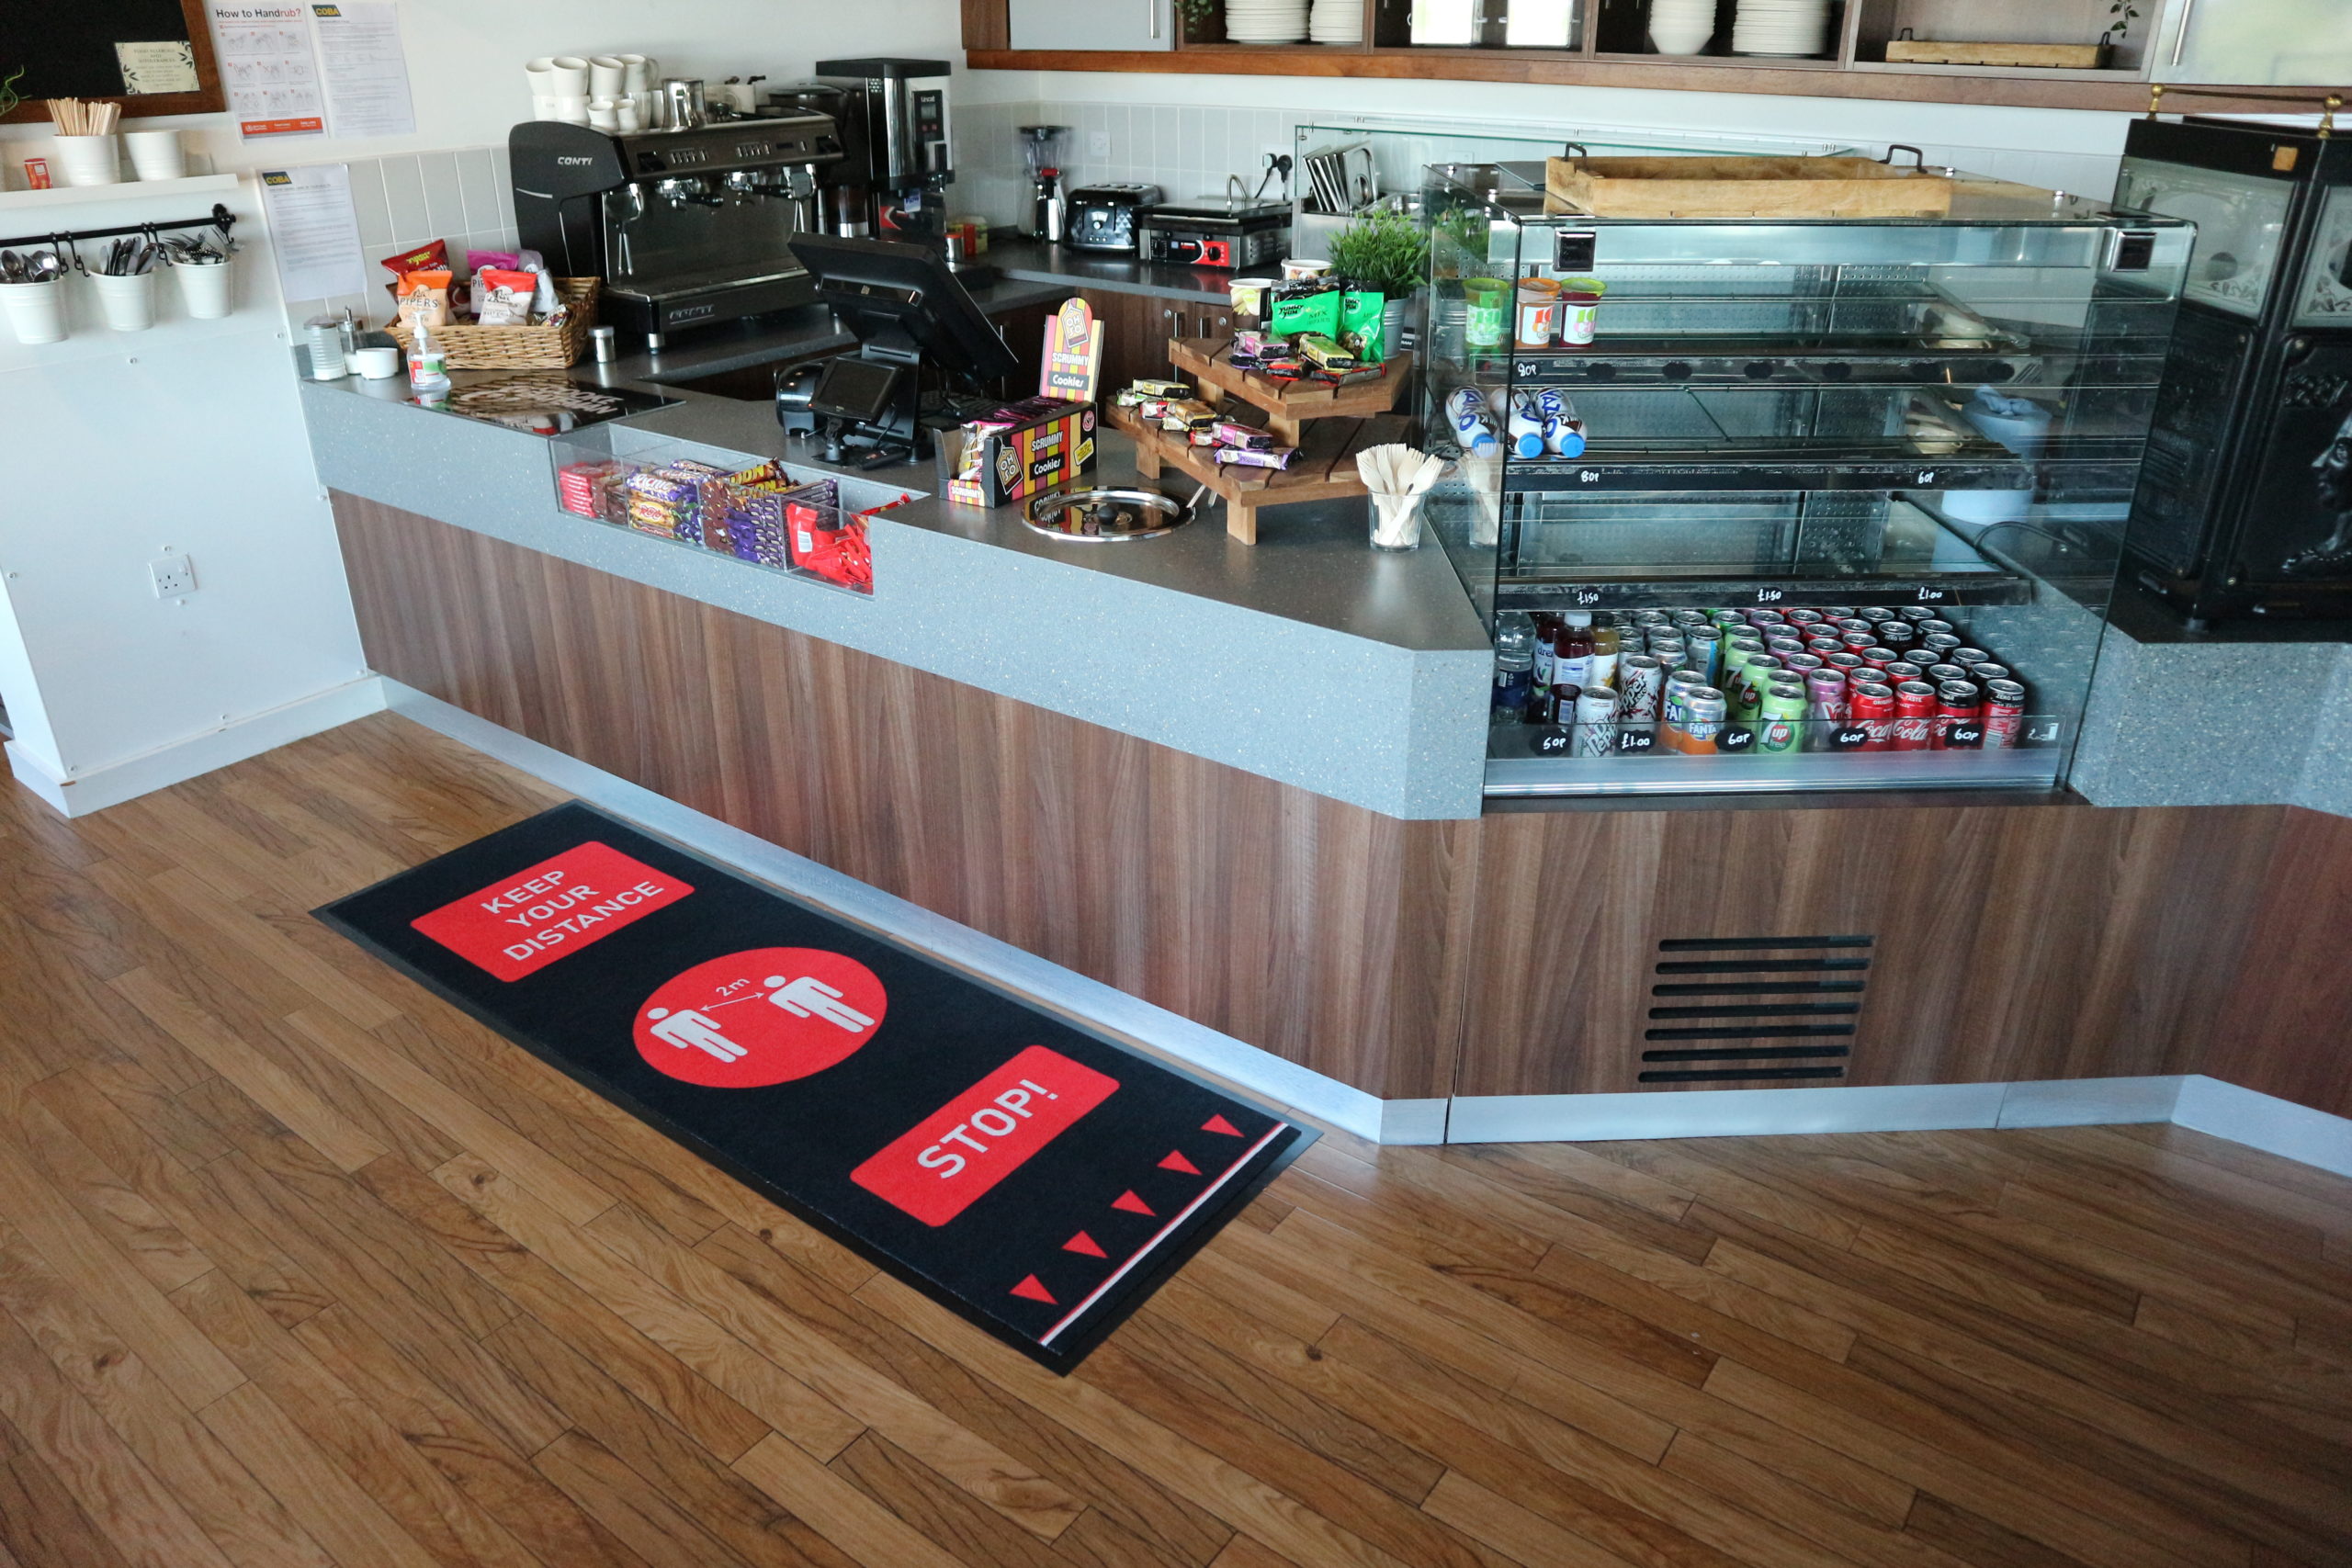 Red Social Distancing Mat by a cafe counter